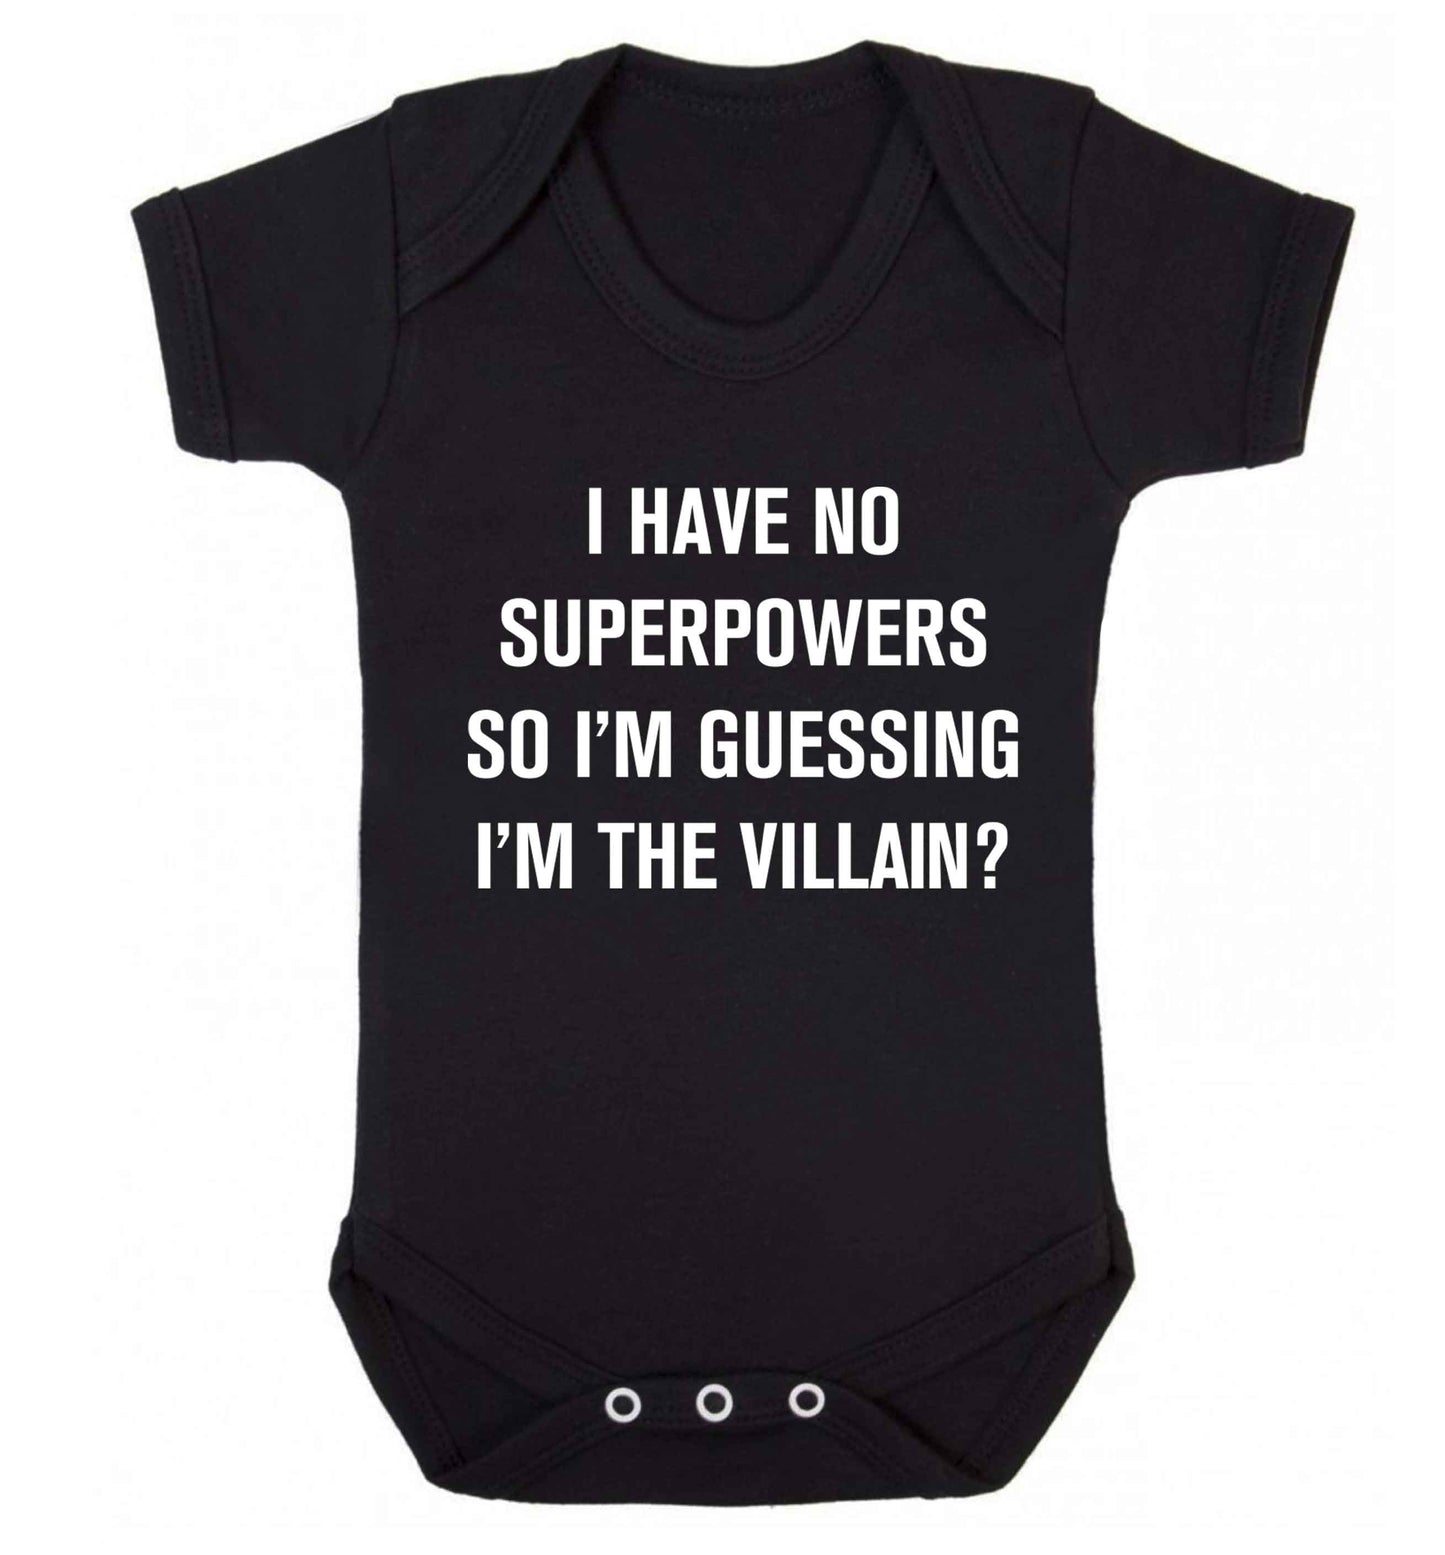 I have no superpowers so I'm guessing I'm the villain? Baby Vest black 18-24 months